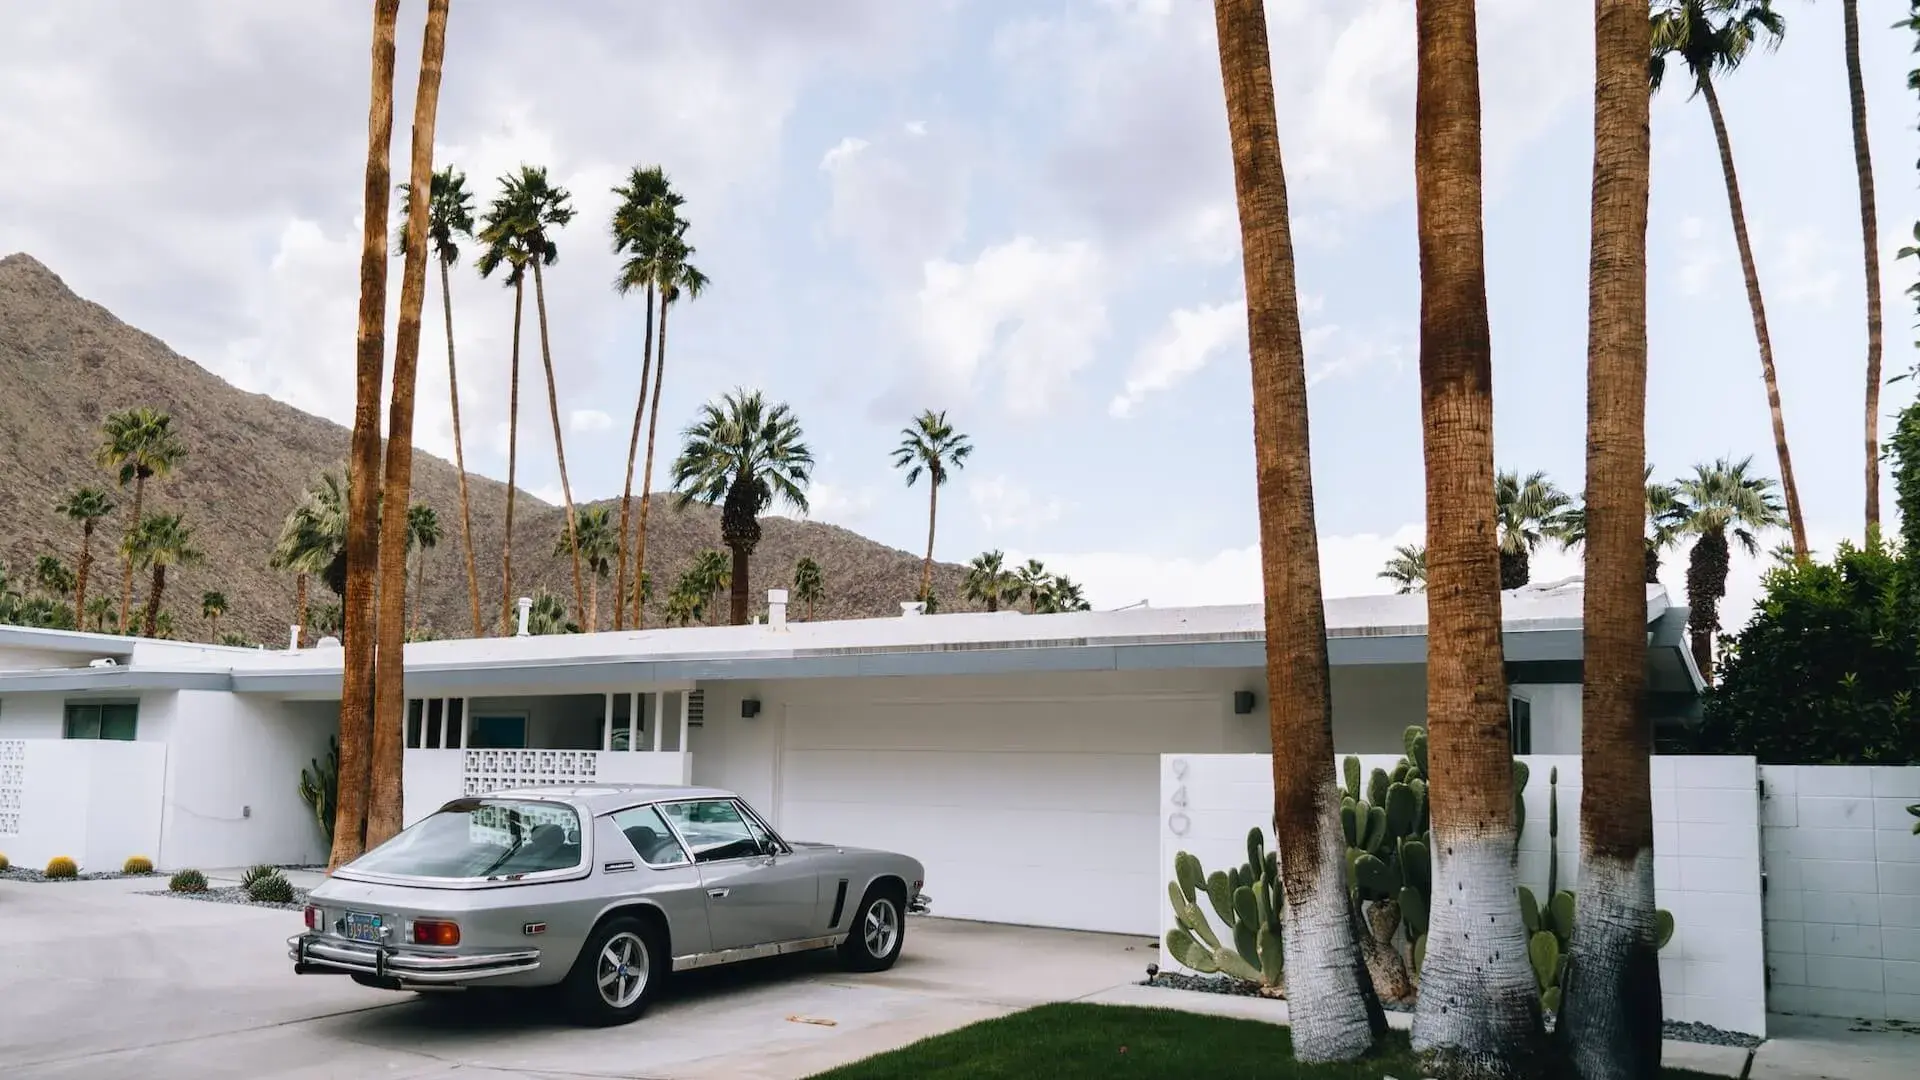 A grey car parked in front of a white big house with palms on the background